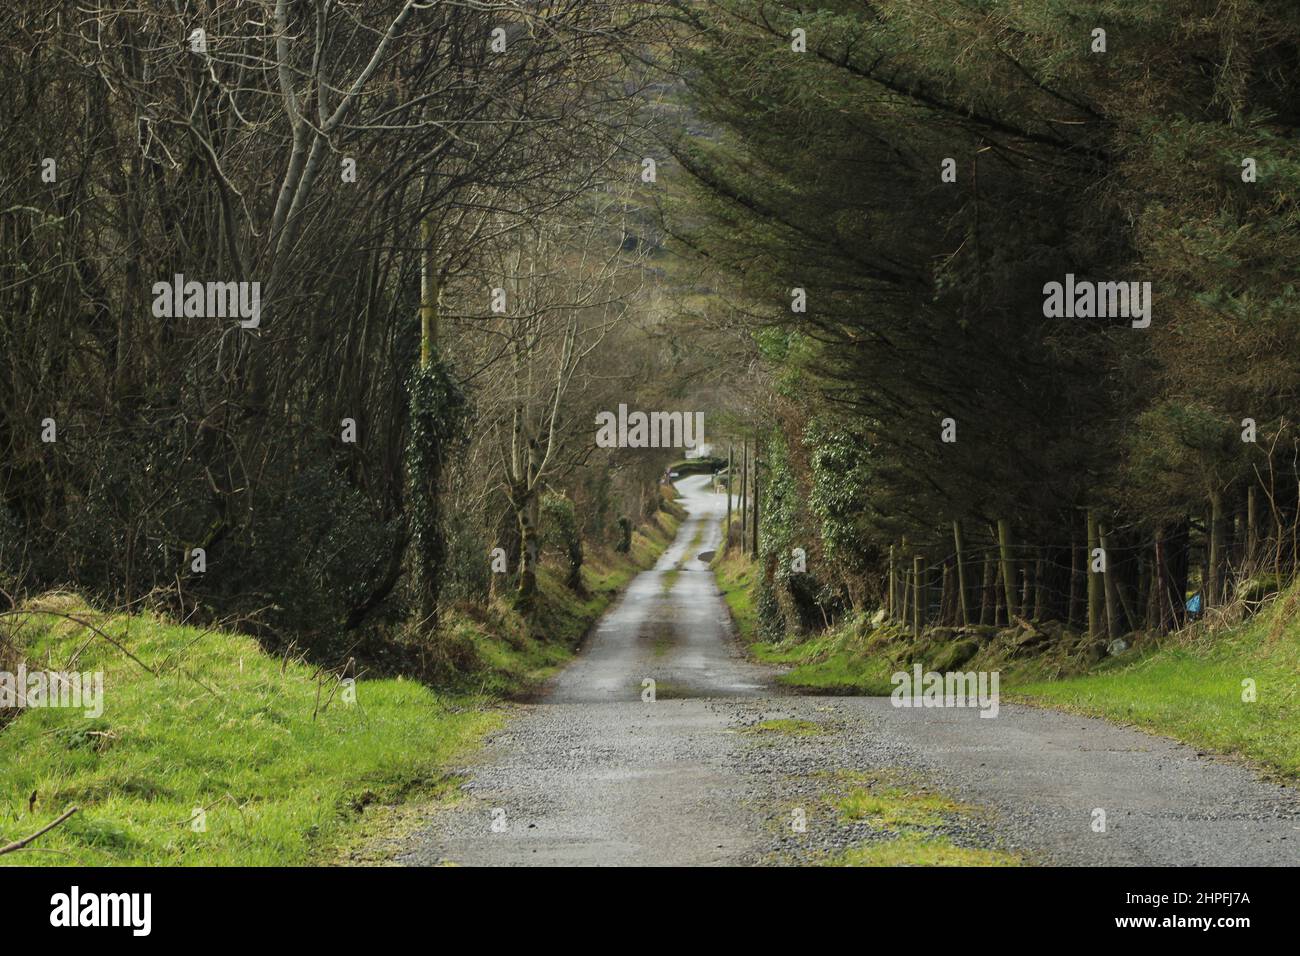 Road through forest in rural Ireland Stock Photo